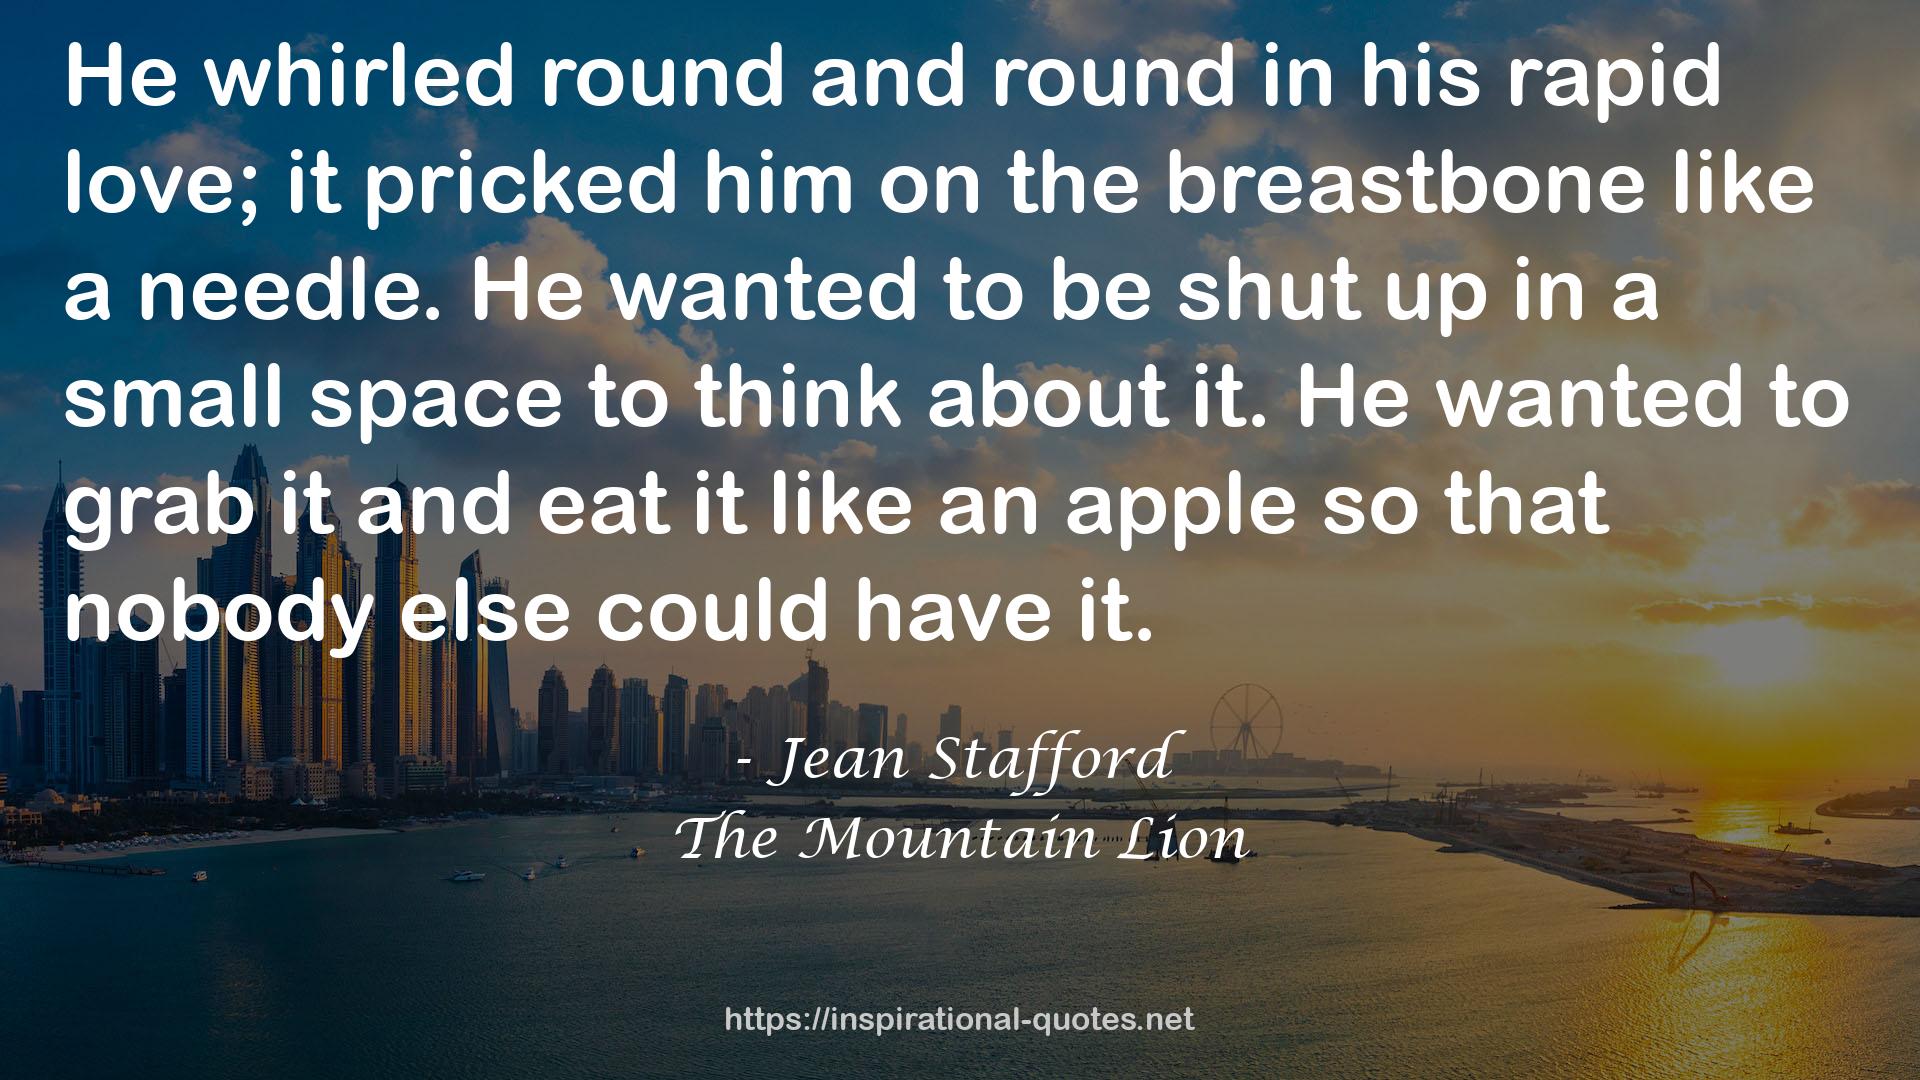 The Mountain Lion QUOTES